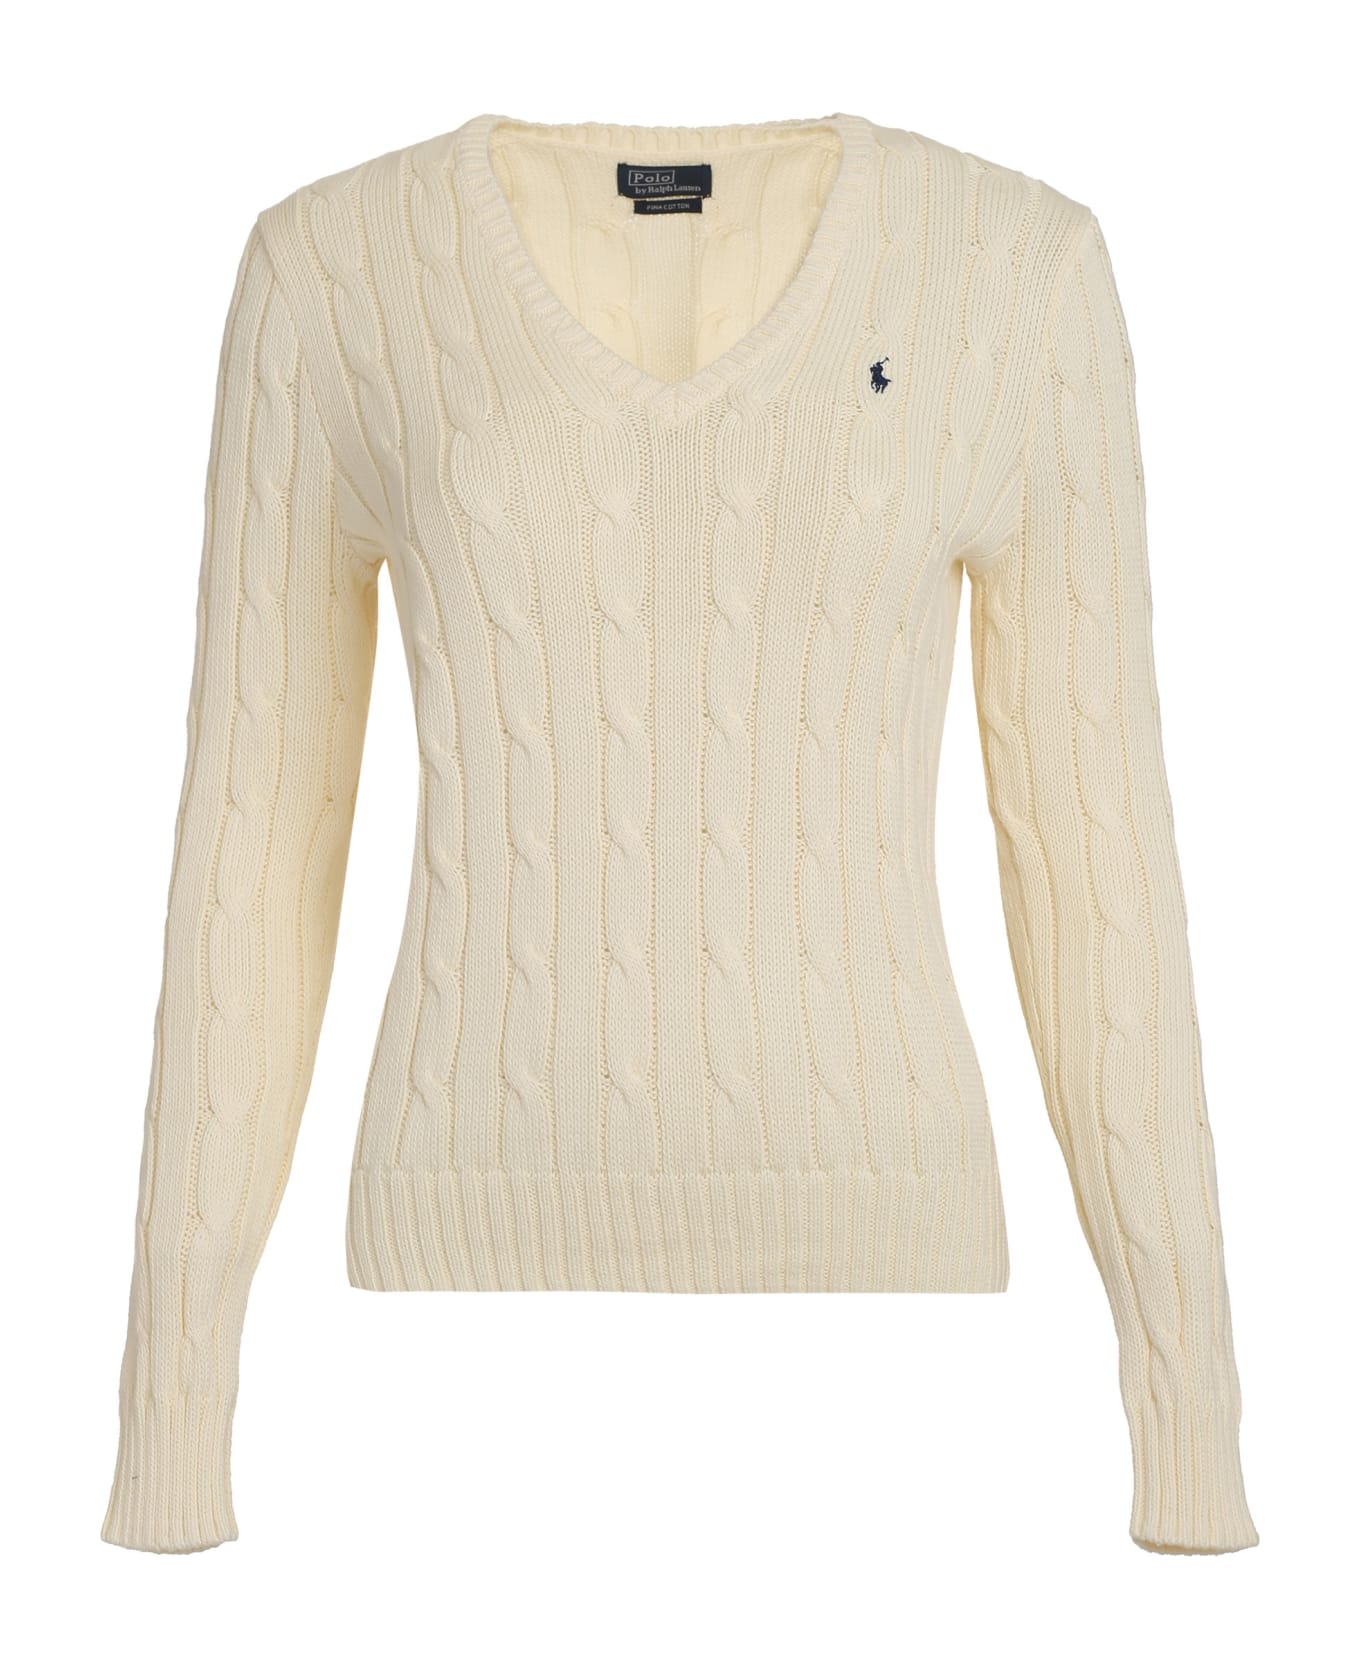 Polo Ralph Lauren Cable Knit Sweater - Beige